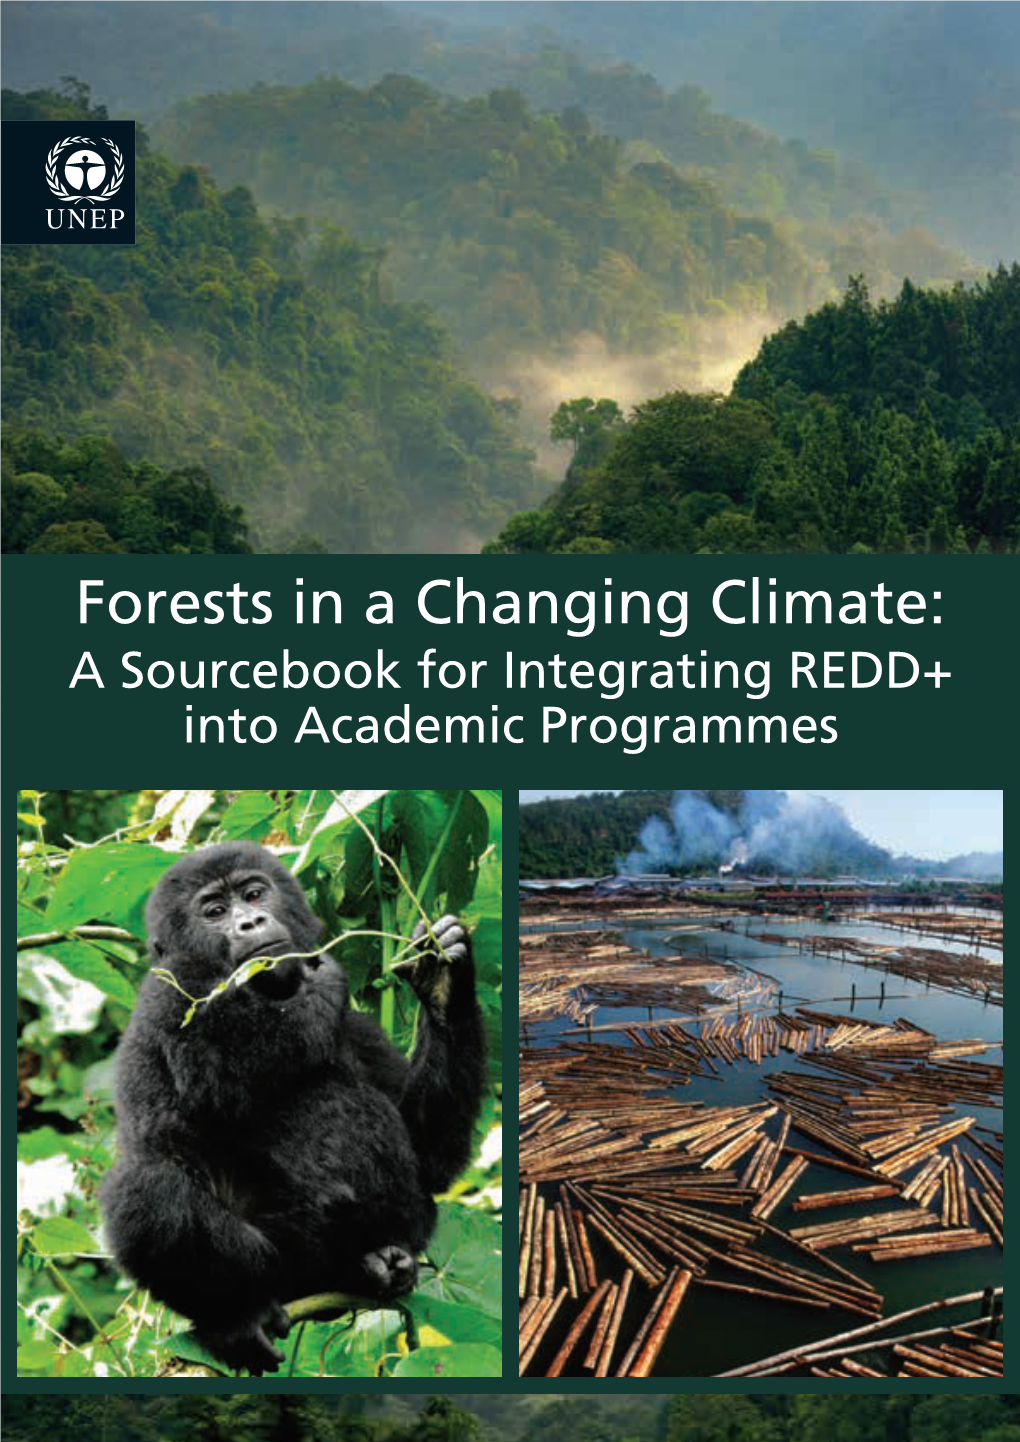 Forests in a Changing Climate: a Sourcebook for Integrating REDD+ Into Academic Programmes